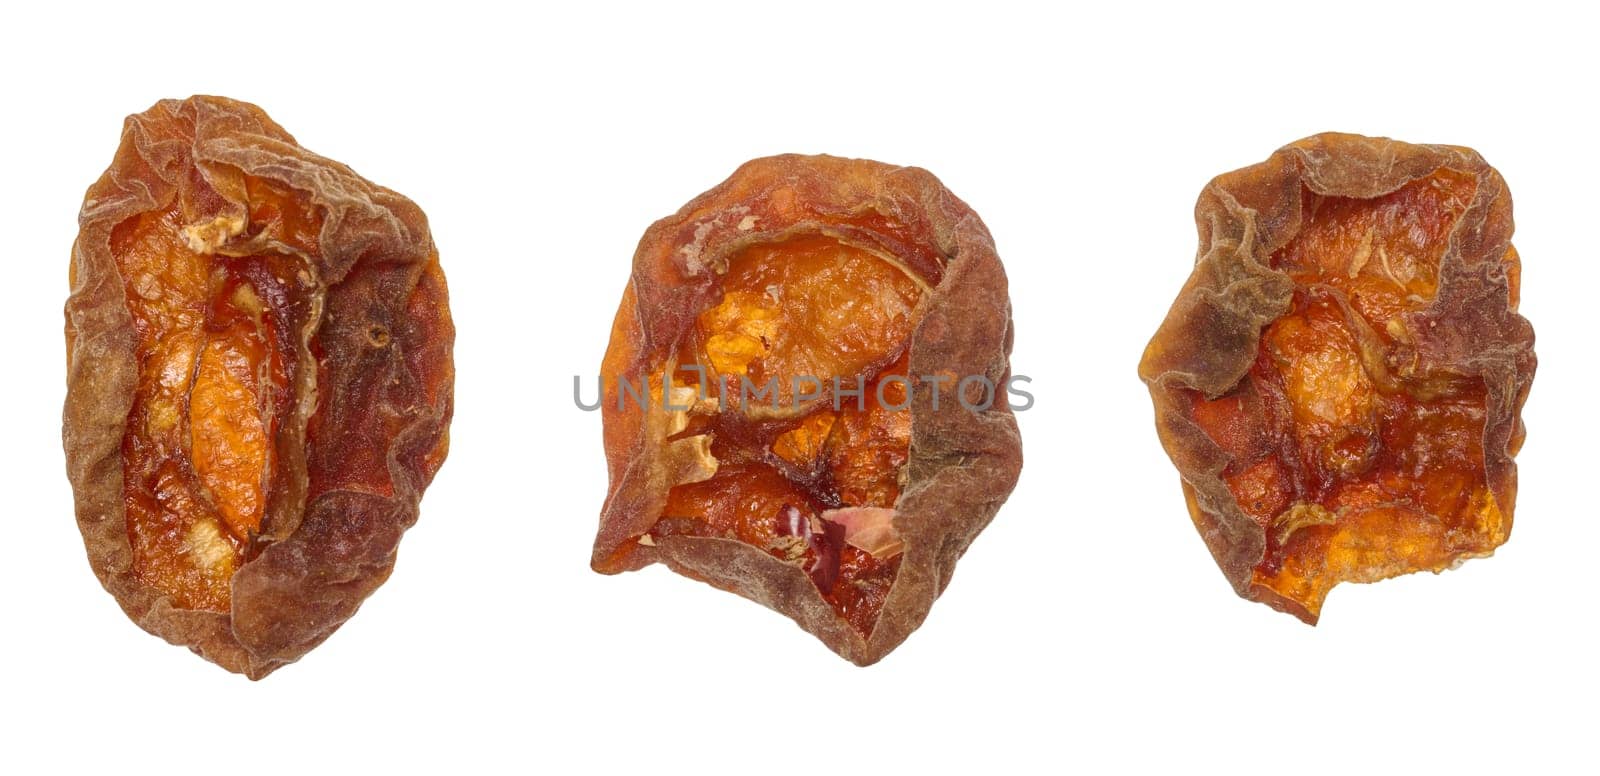 Dried apricot on isolated background, set